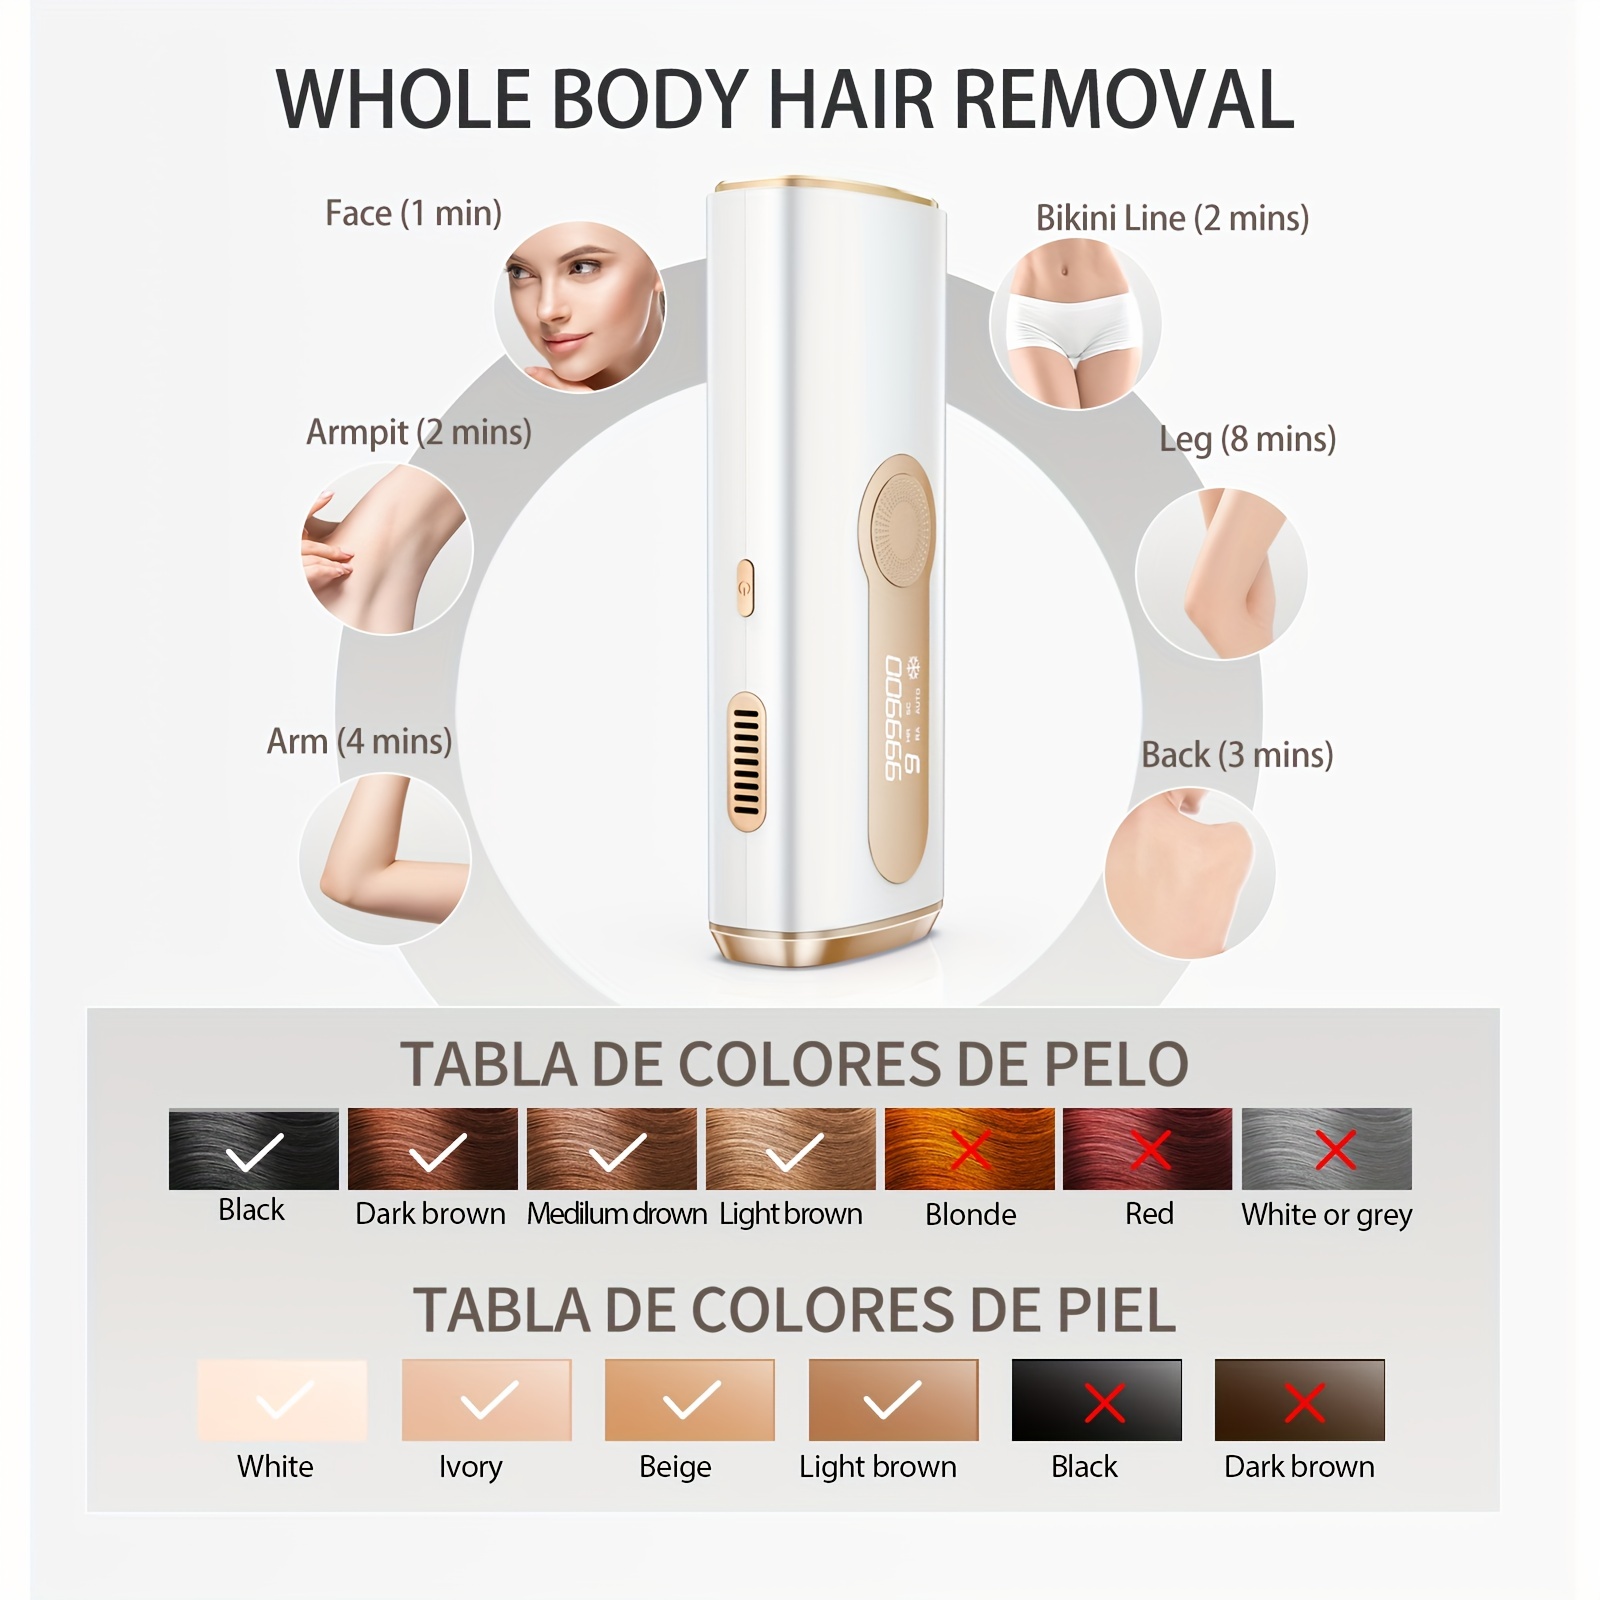 Laser Hair Removal,Laser Hair Removal For Women Permanent,Ipl Hair Removal  Devices At Home Depiladora Laser Para Mujer Laser Hair Removal 999900  Flashes For Facial Legs Arms Whole Body (Black)